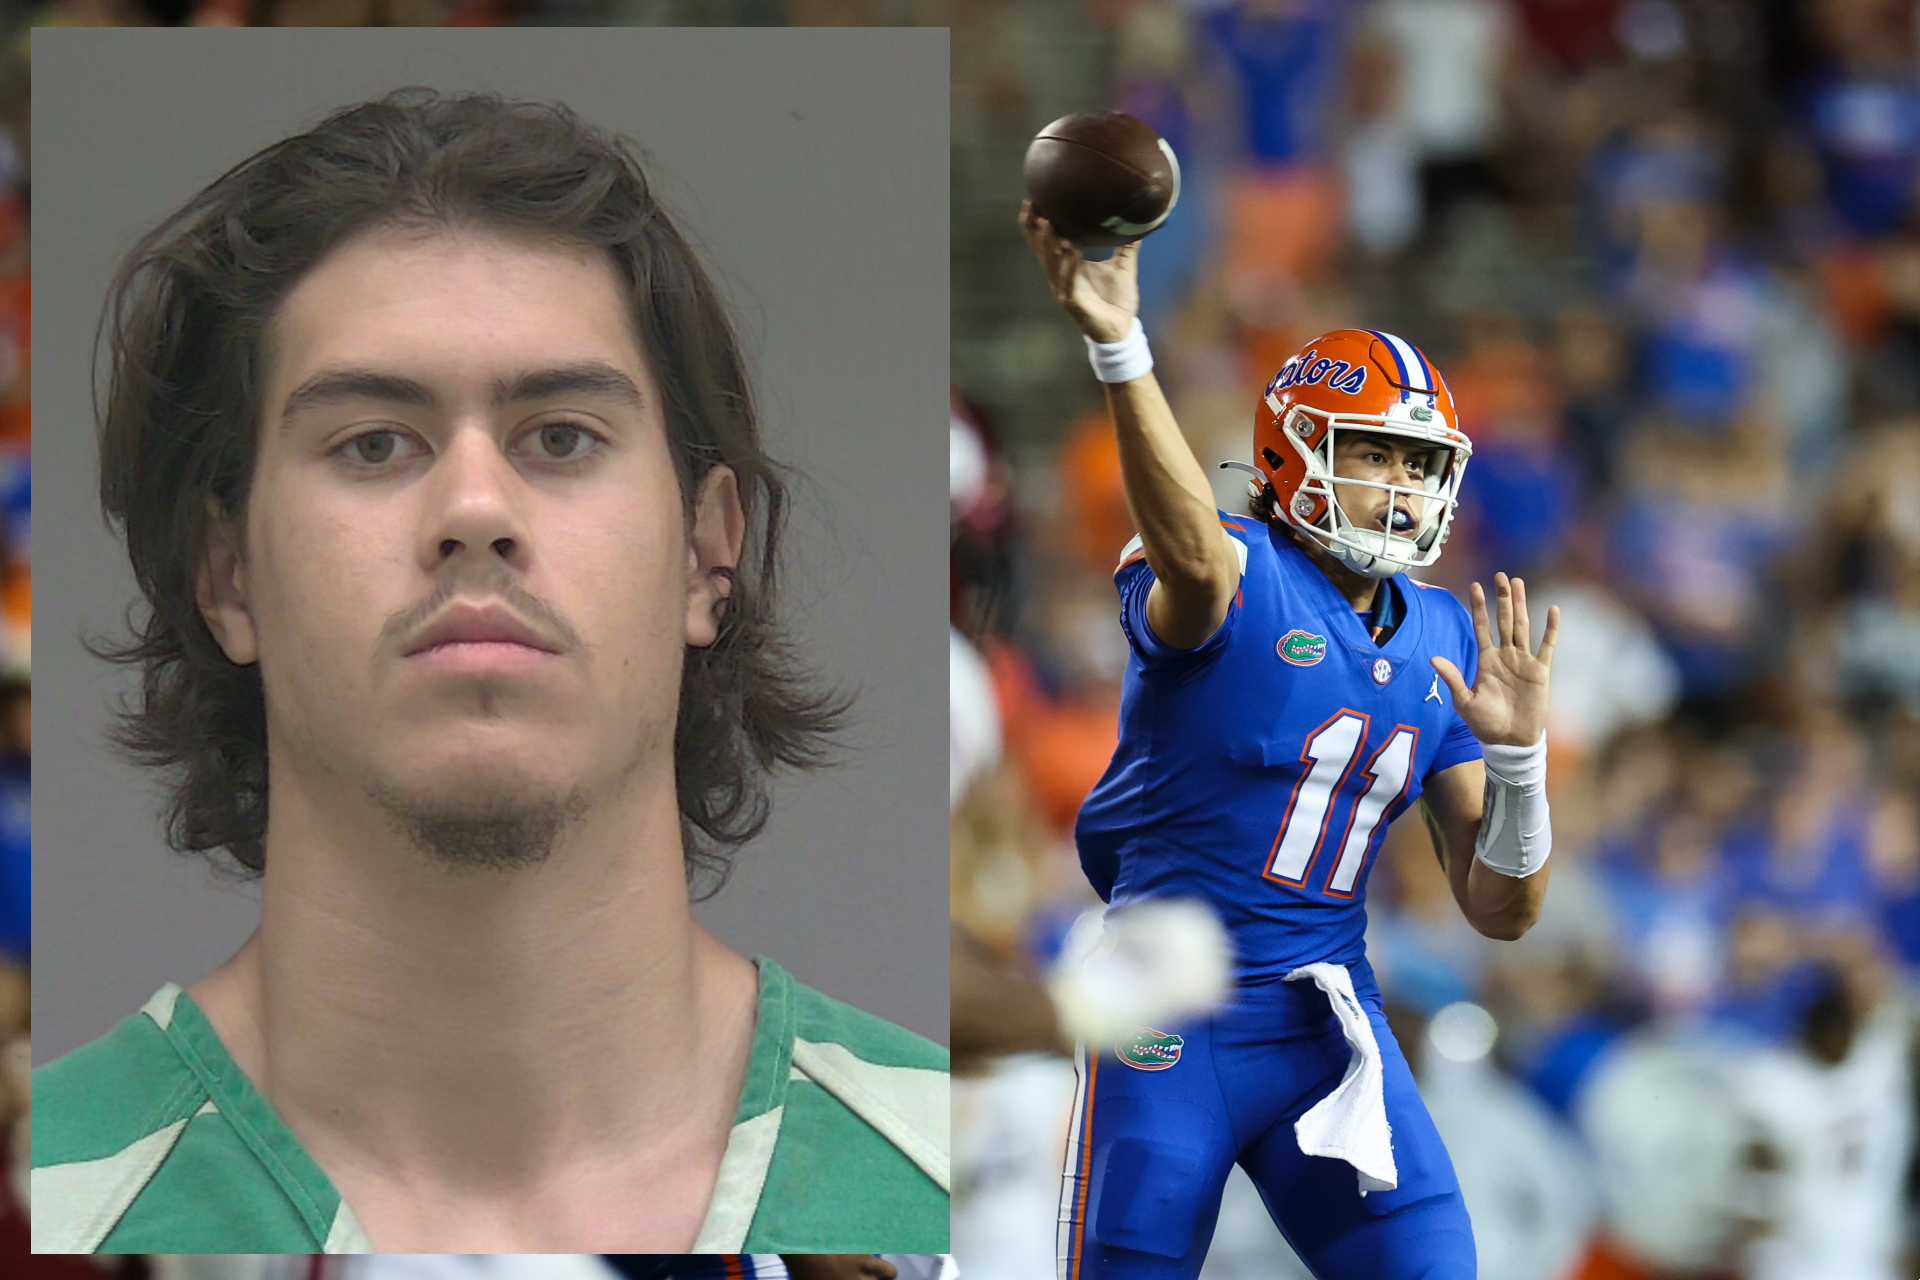 Florida football player, son of former Detroit Lions QB, arrested on child  porn charges